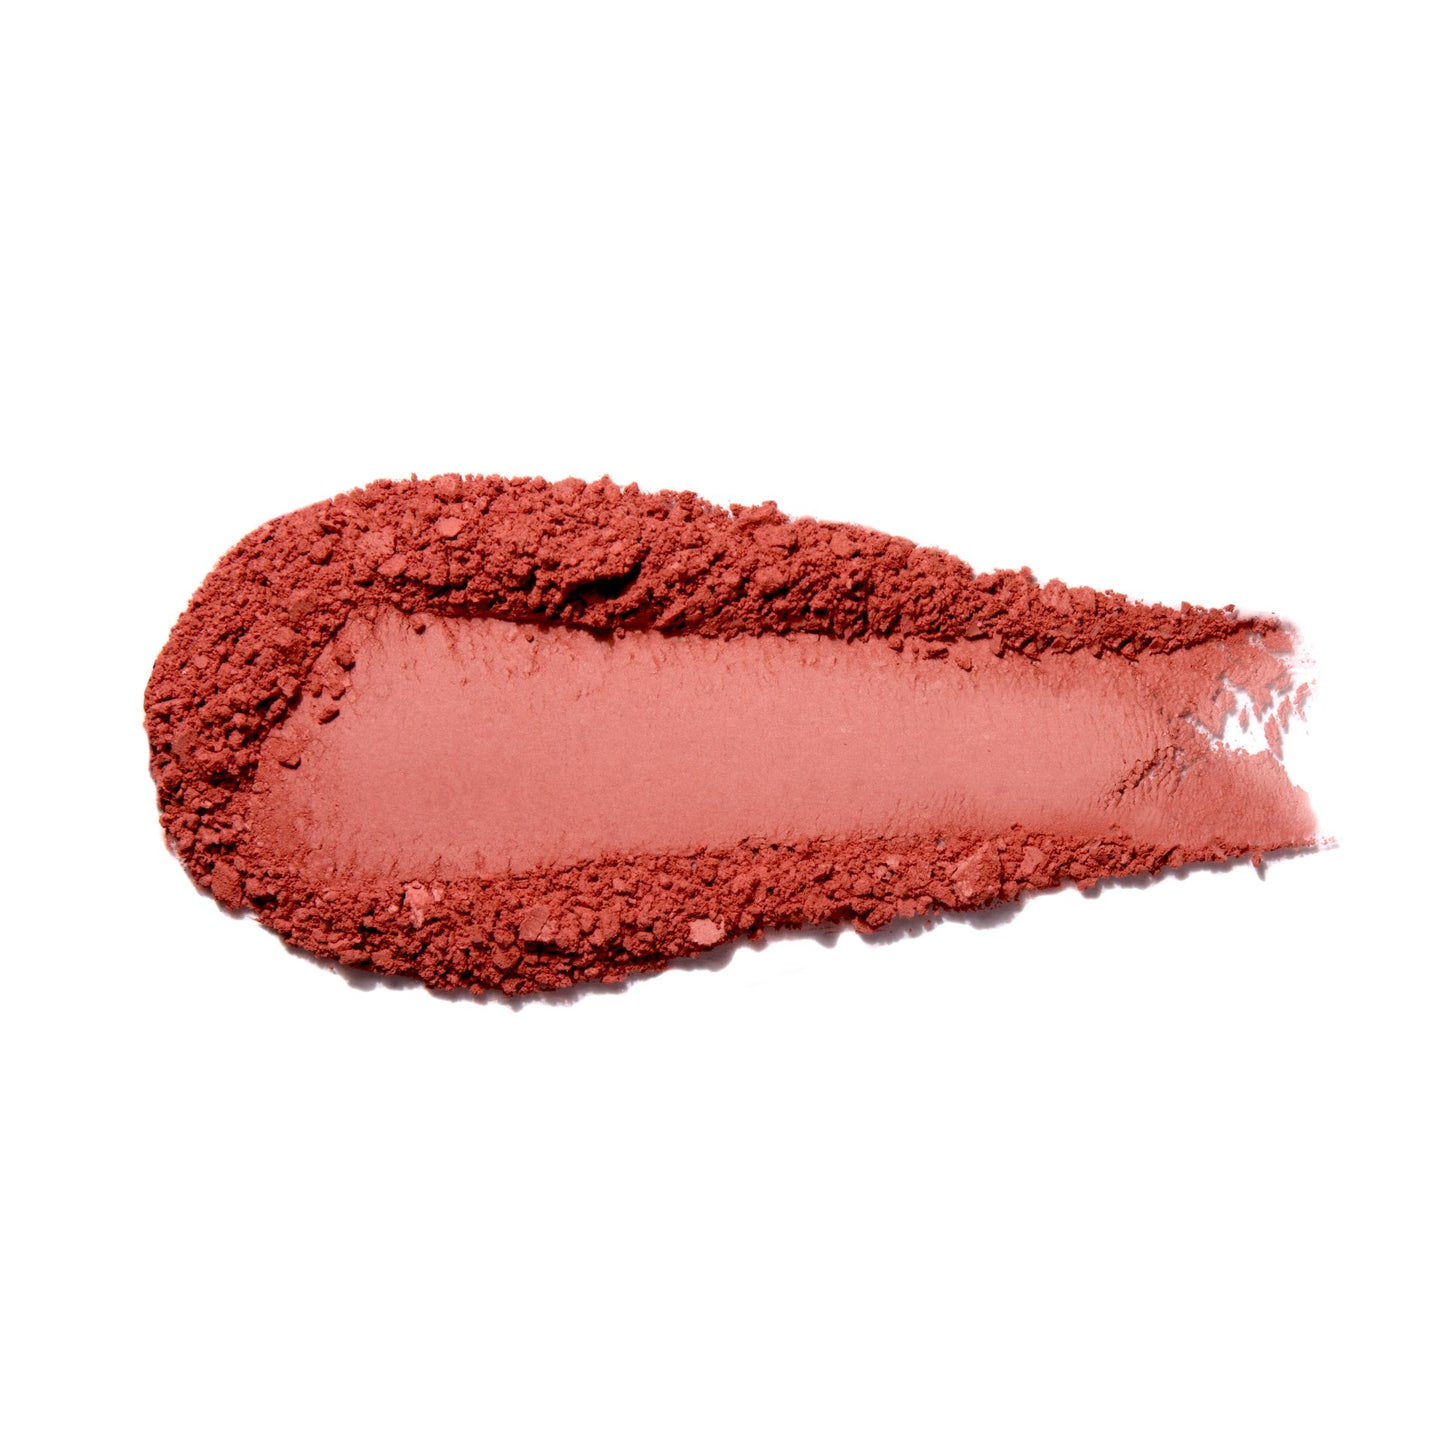 100% PURE Fruit Pigmented Blush healthy